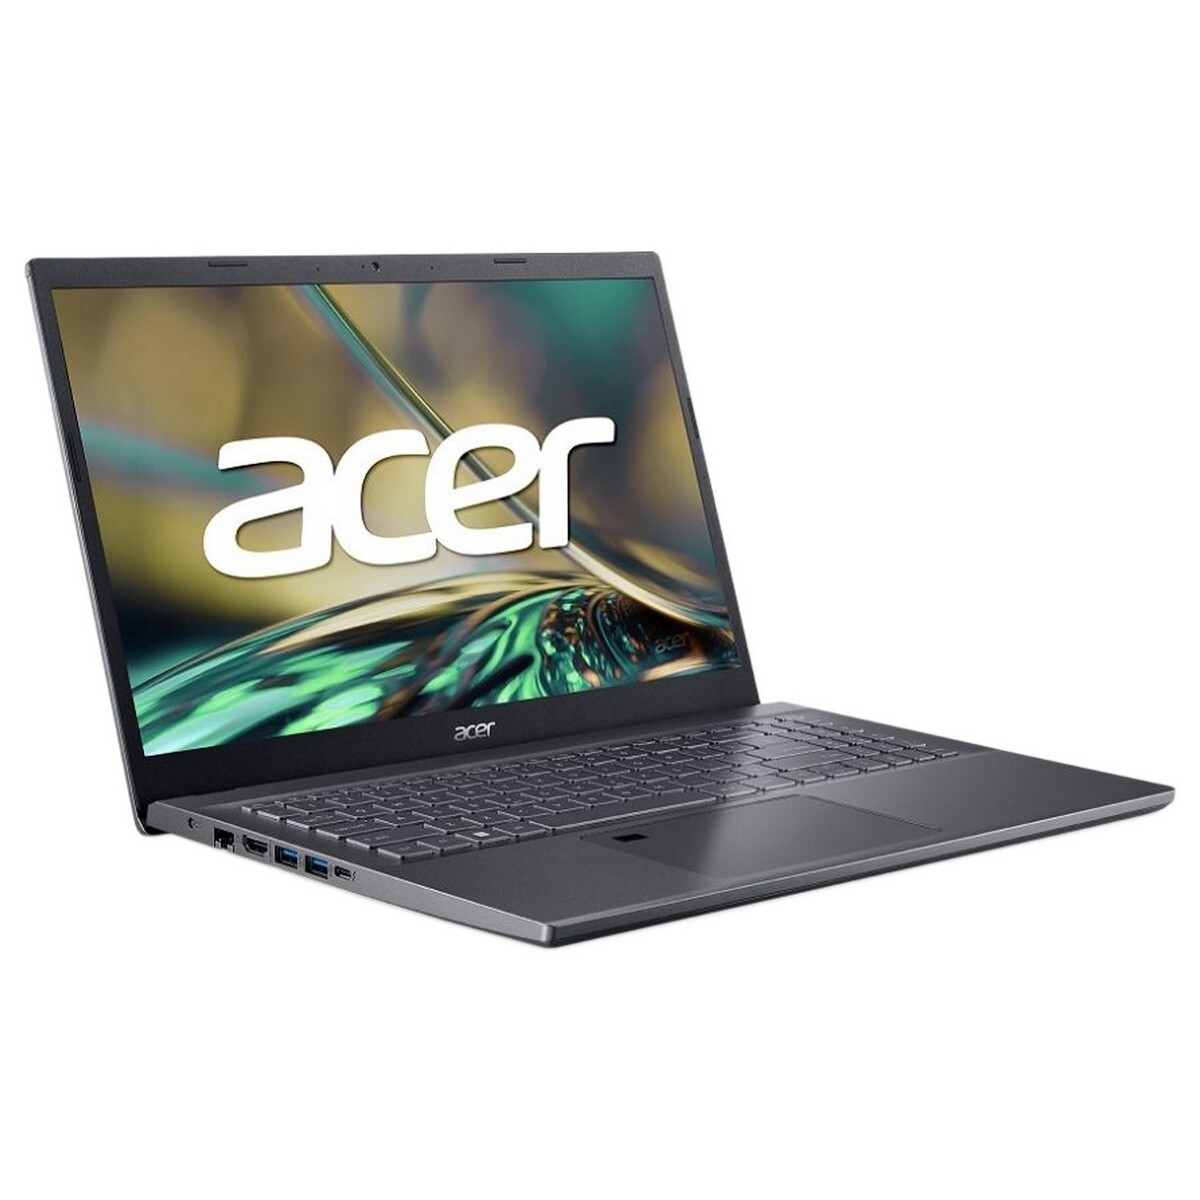 Acer Aspire 5 gaming Core i5 12th Gen 1240P - (8 GB/512 GB SSD/Windows 11 Home/4 GB Graphics/NVIDIA GeForce RTX RTX 2050) A515-57G Gaming Laptop